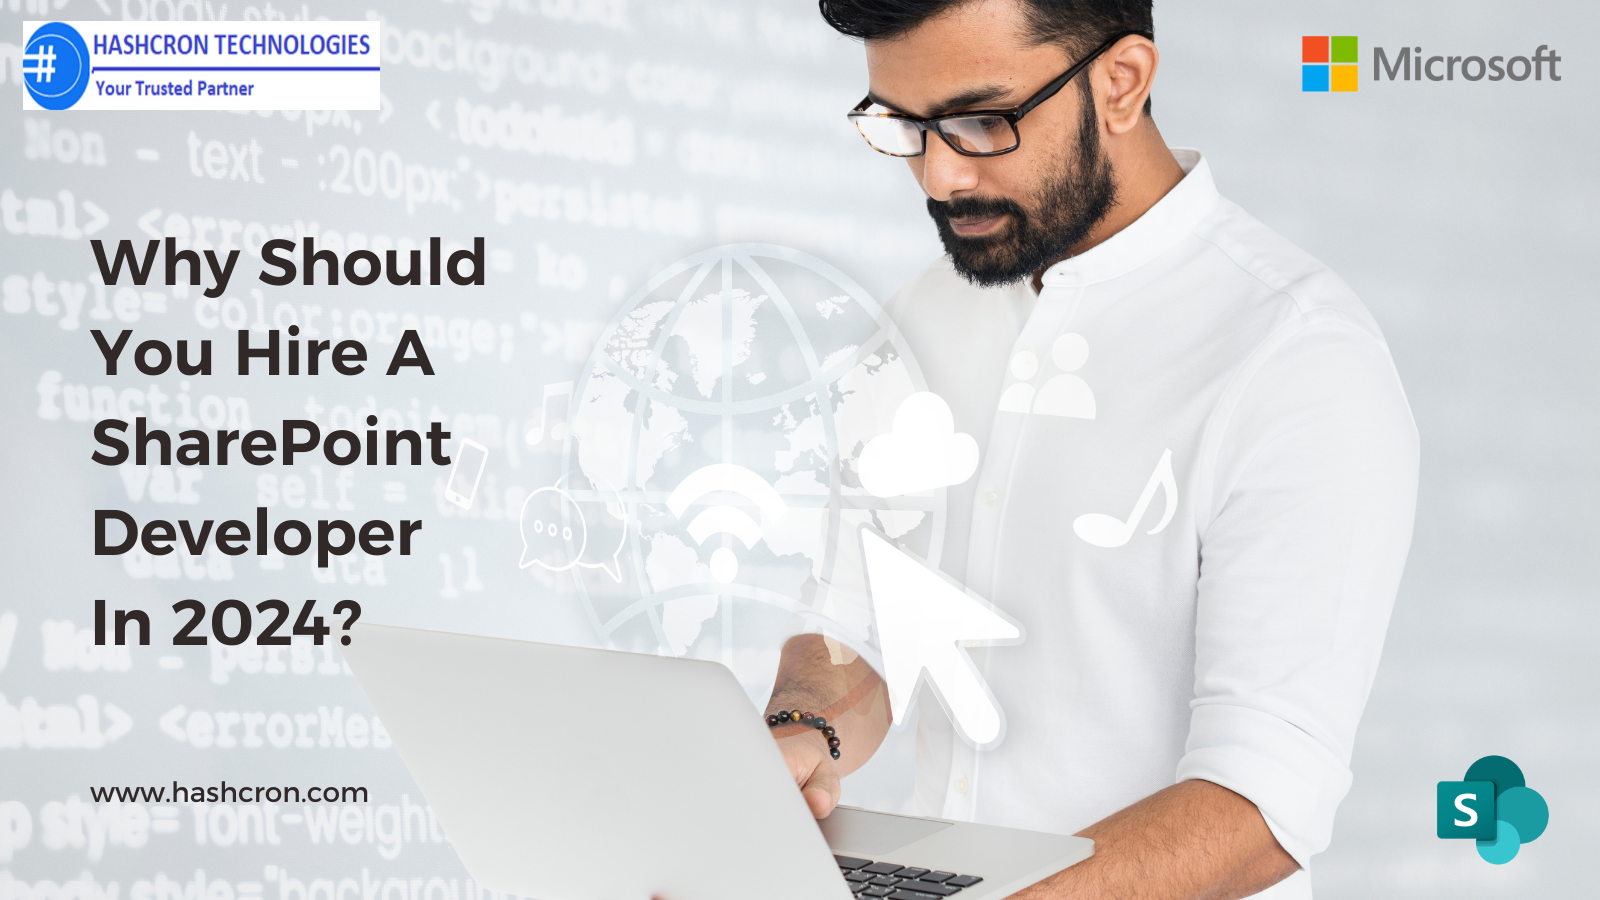 Why Should You Hire a SharePoint Developer?